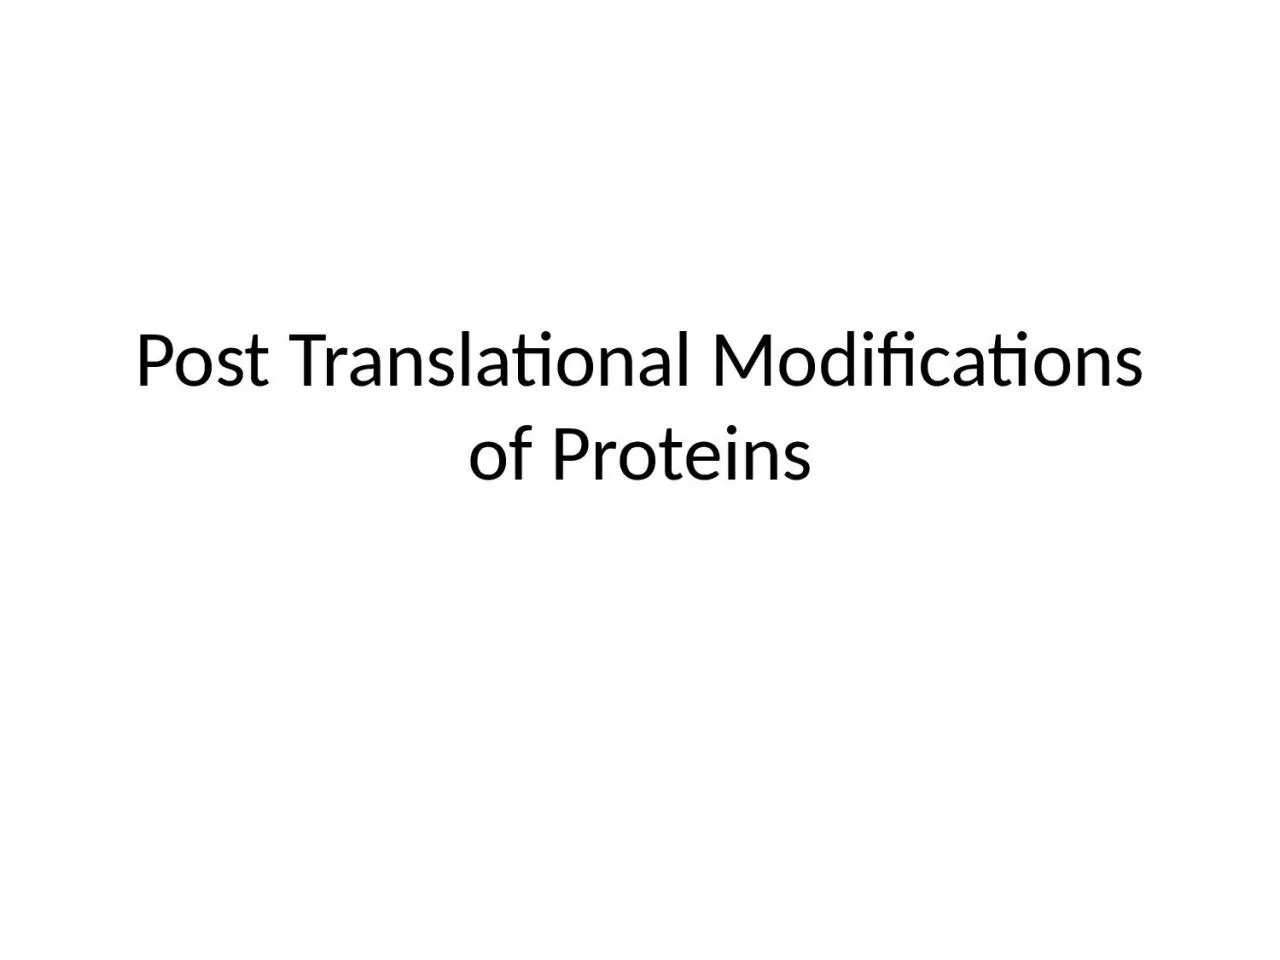 Post Translational Modifications of Proteins